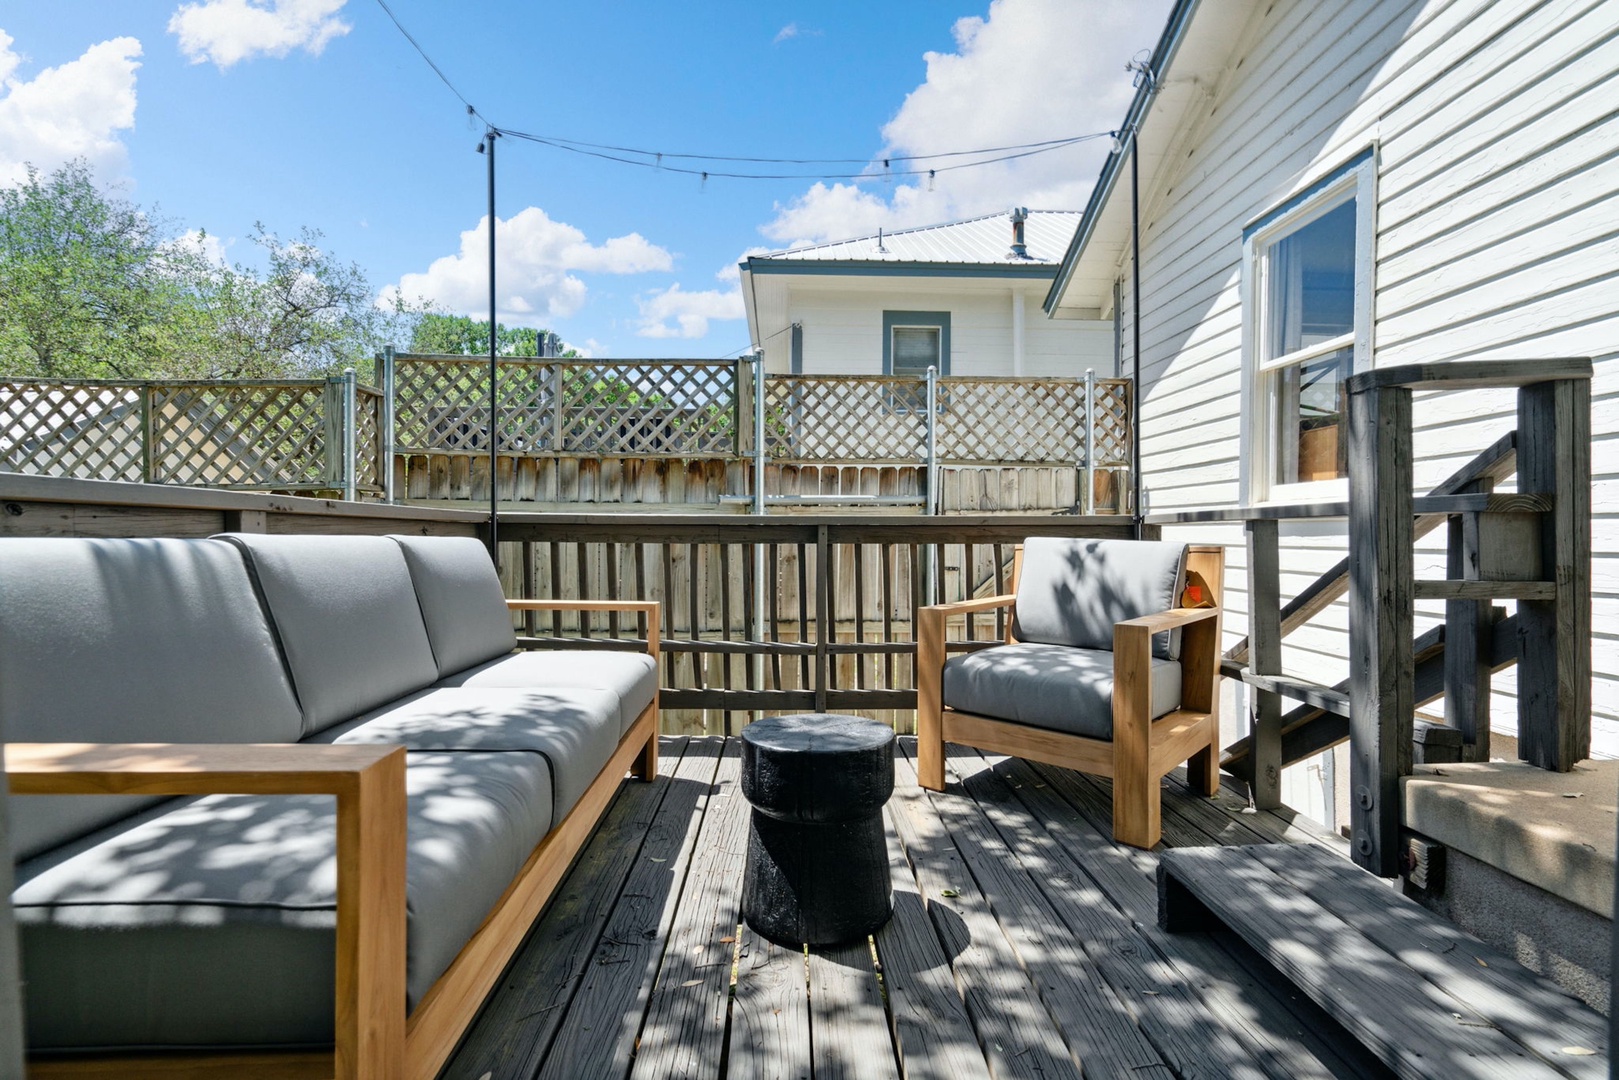 Kick back & relax in the sunshine on the cozy back deck!